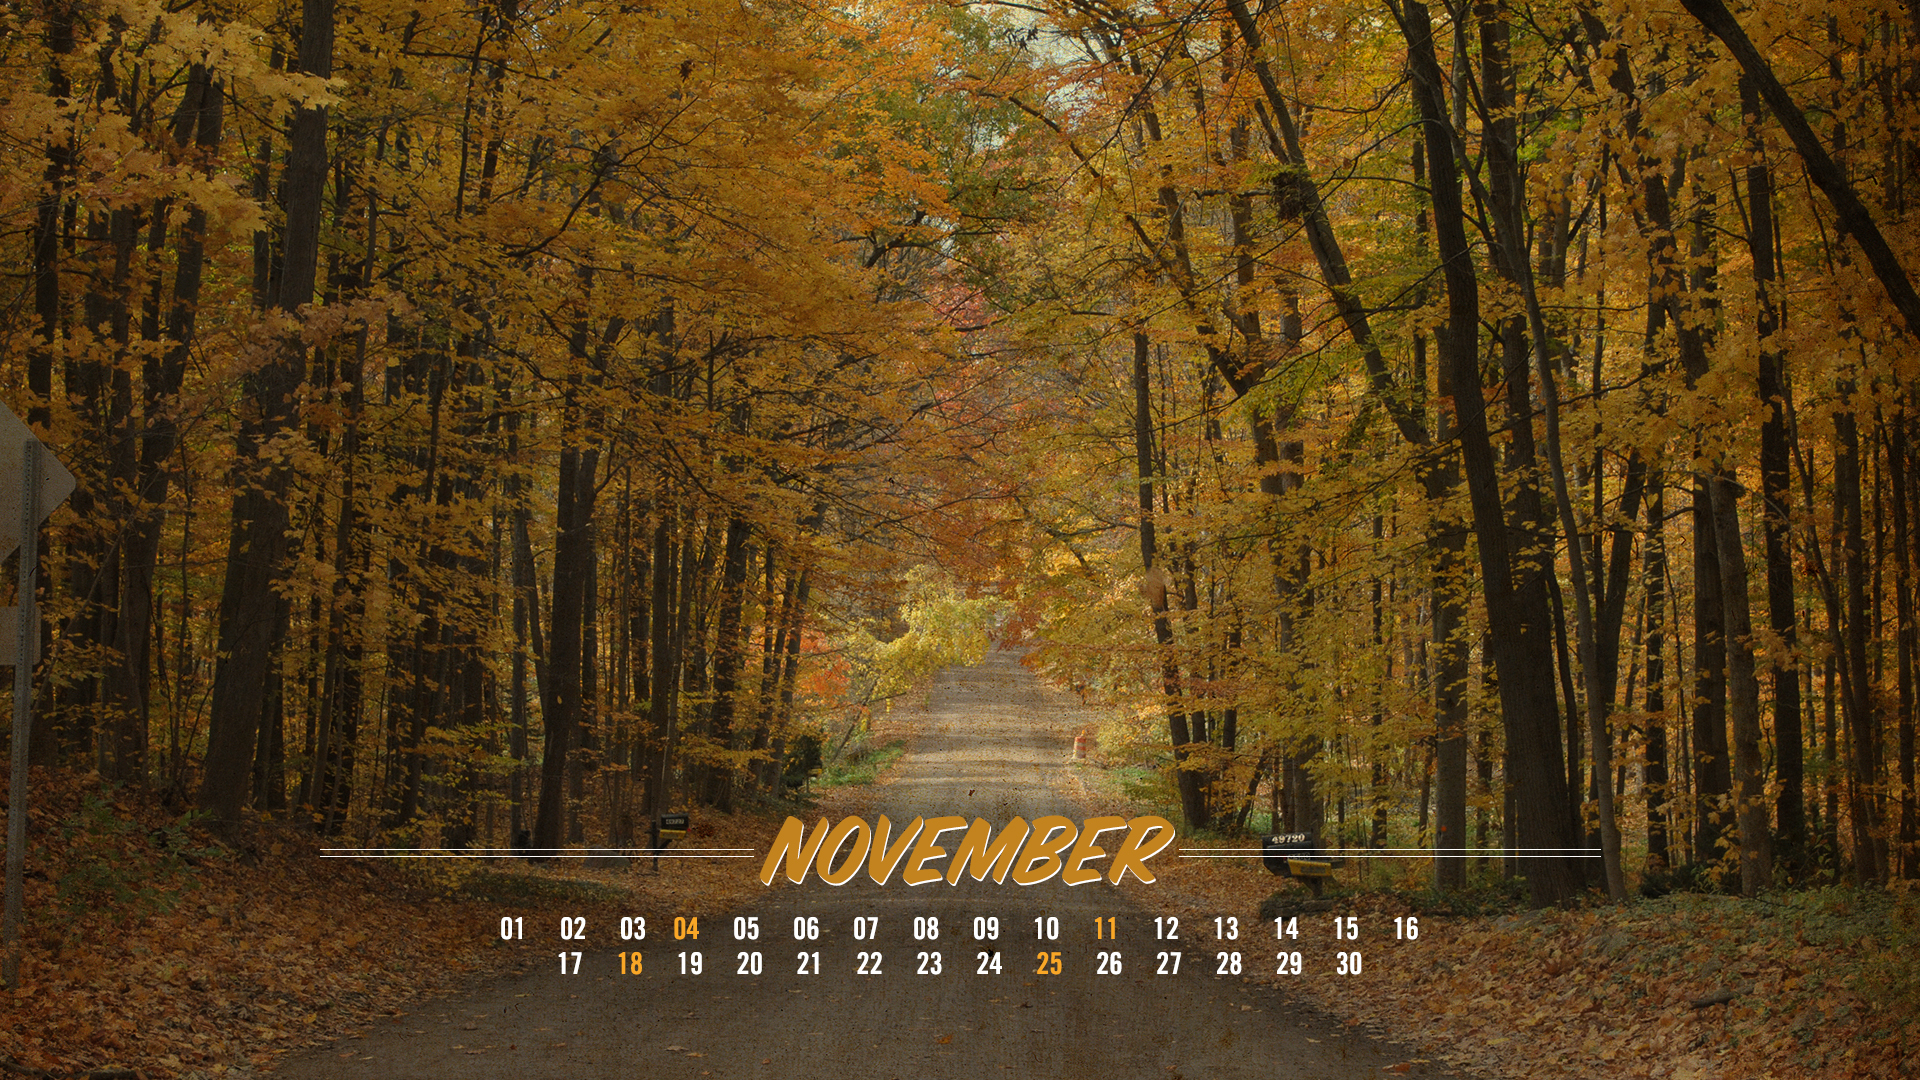 The Early November Wallpapers